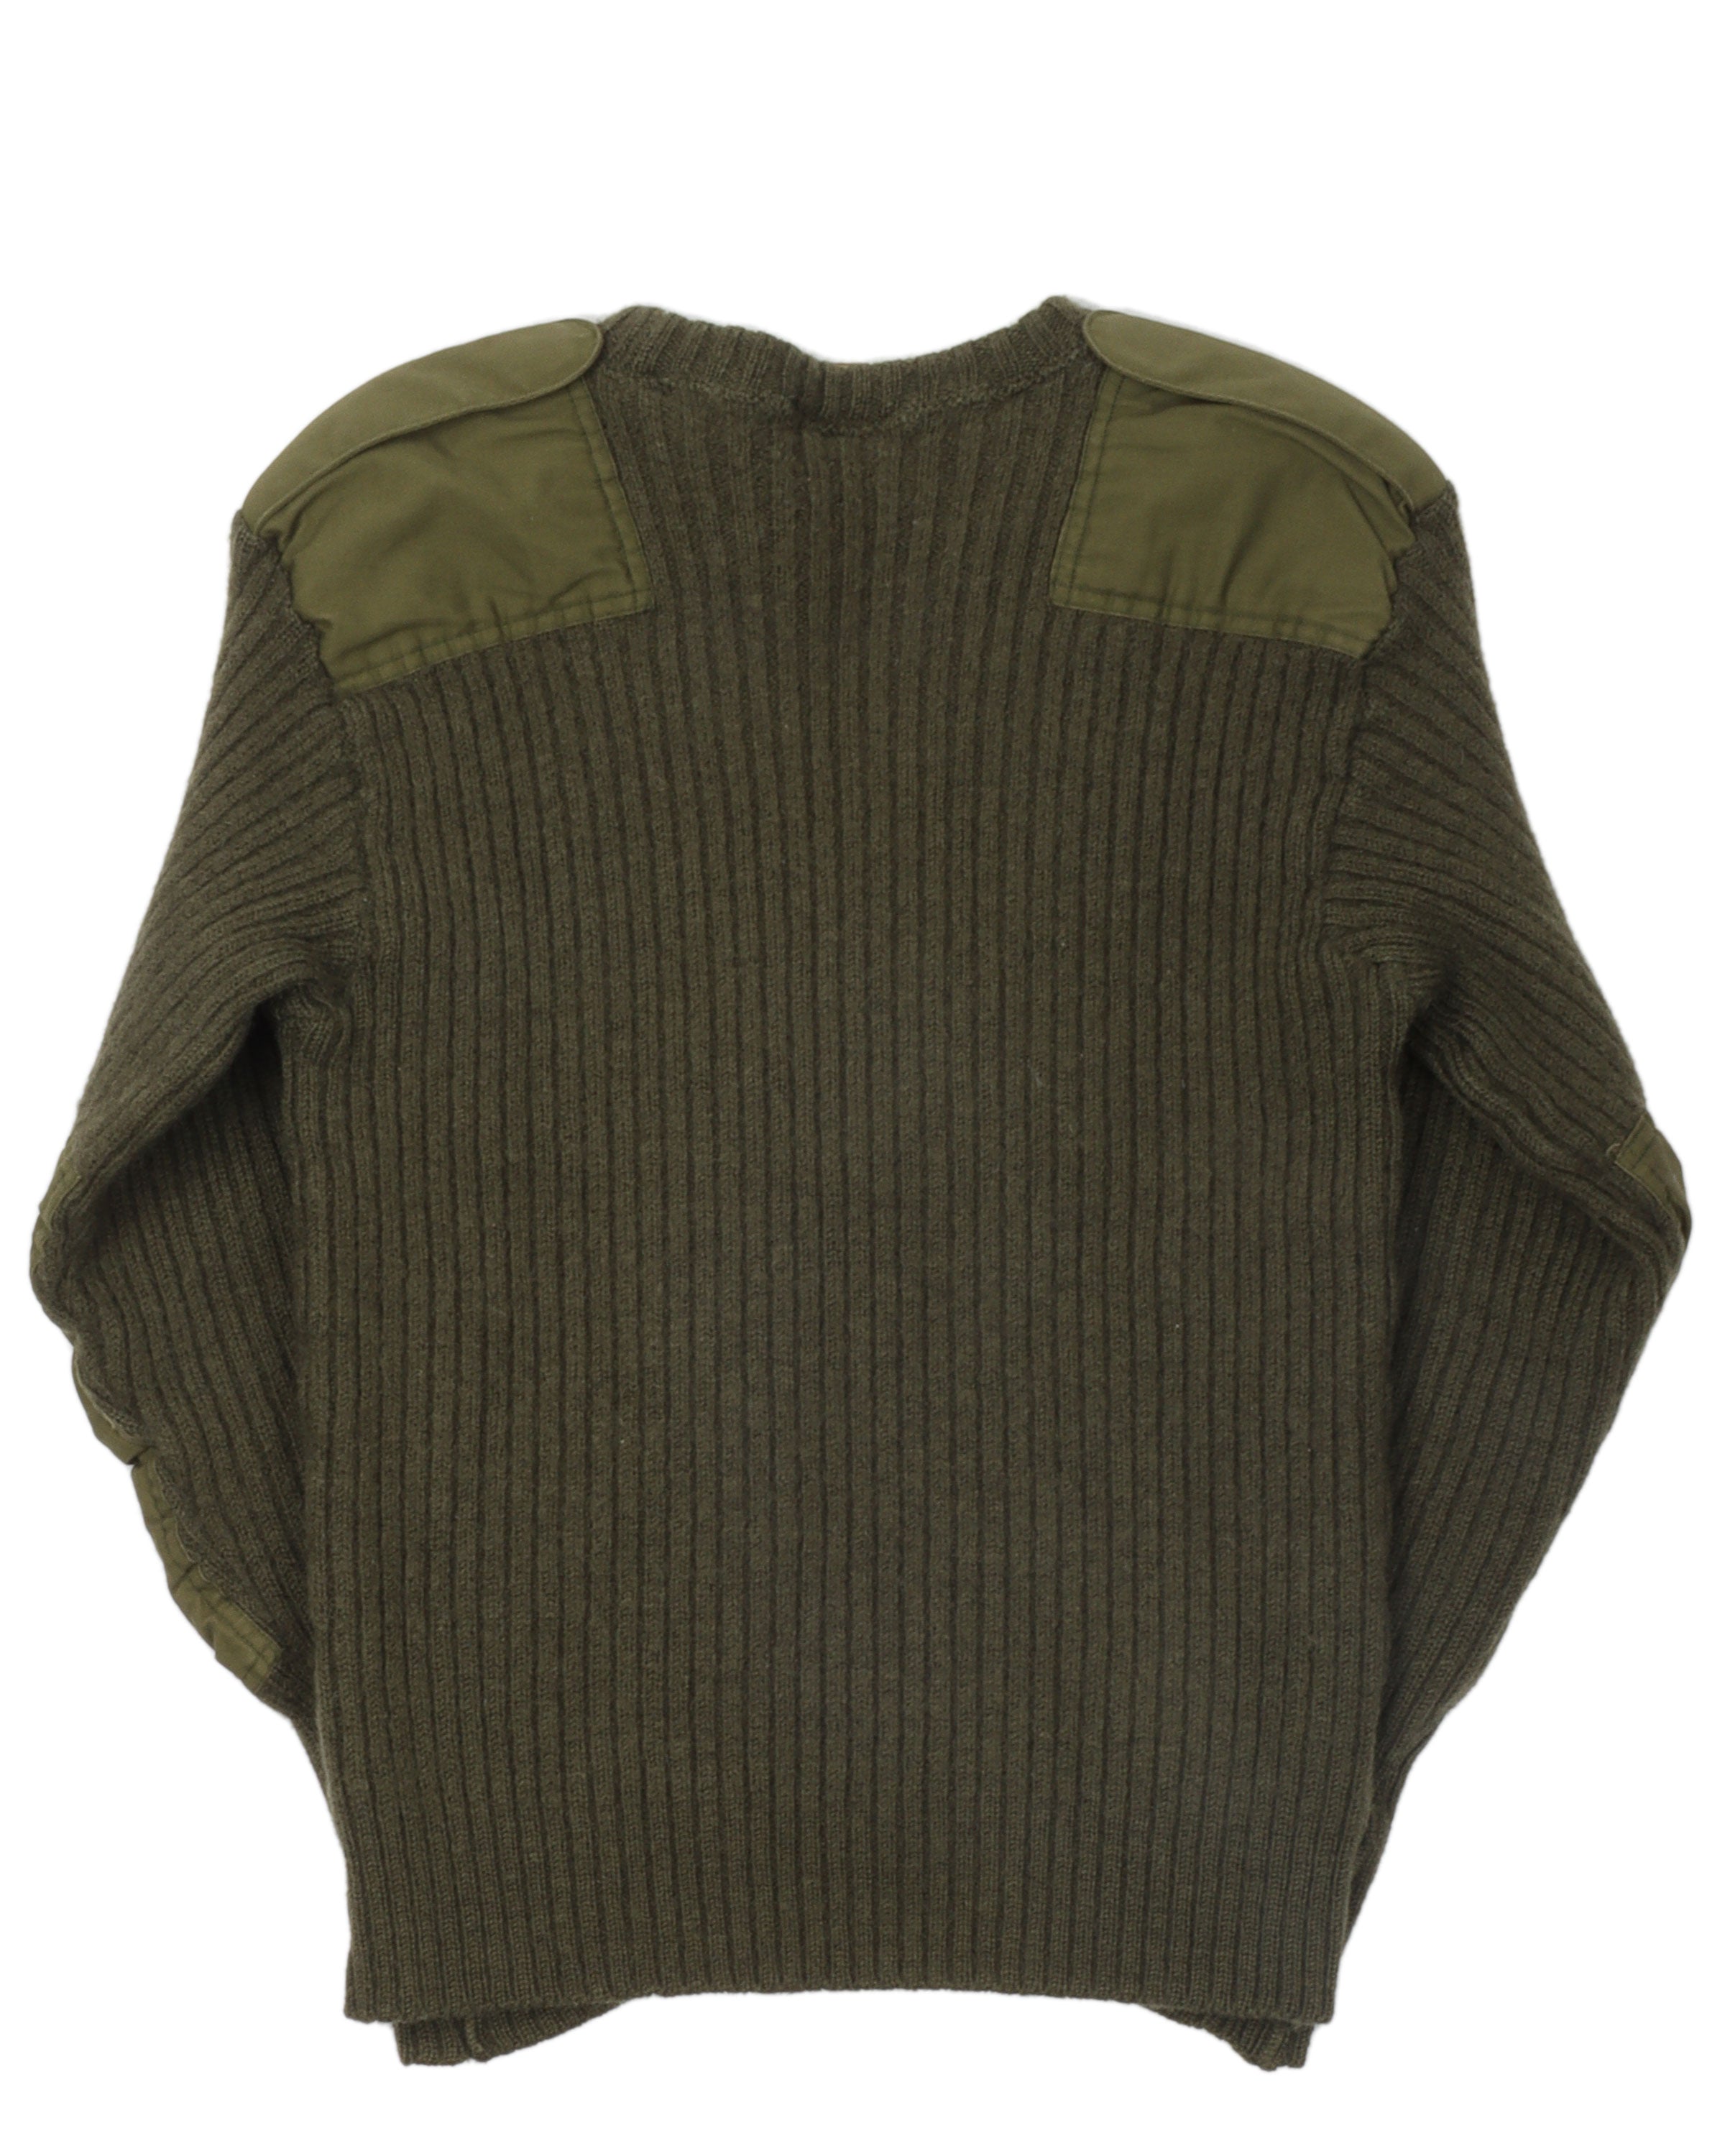 Olive Military Sweater